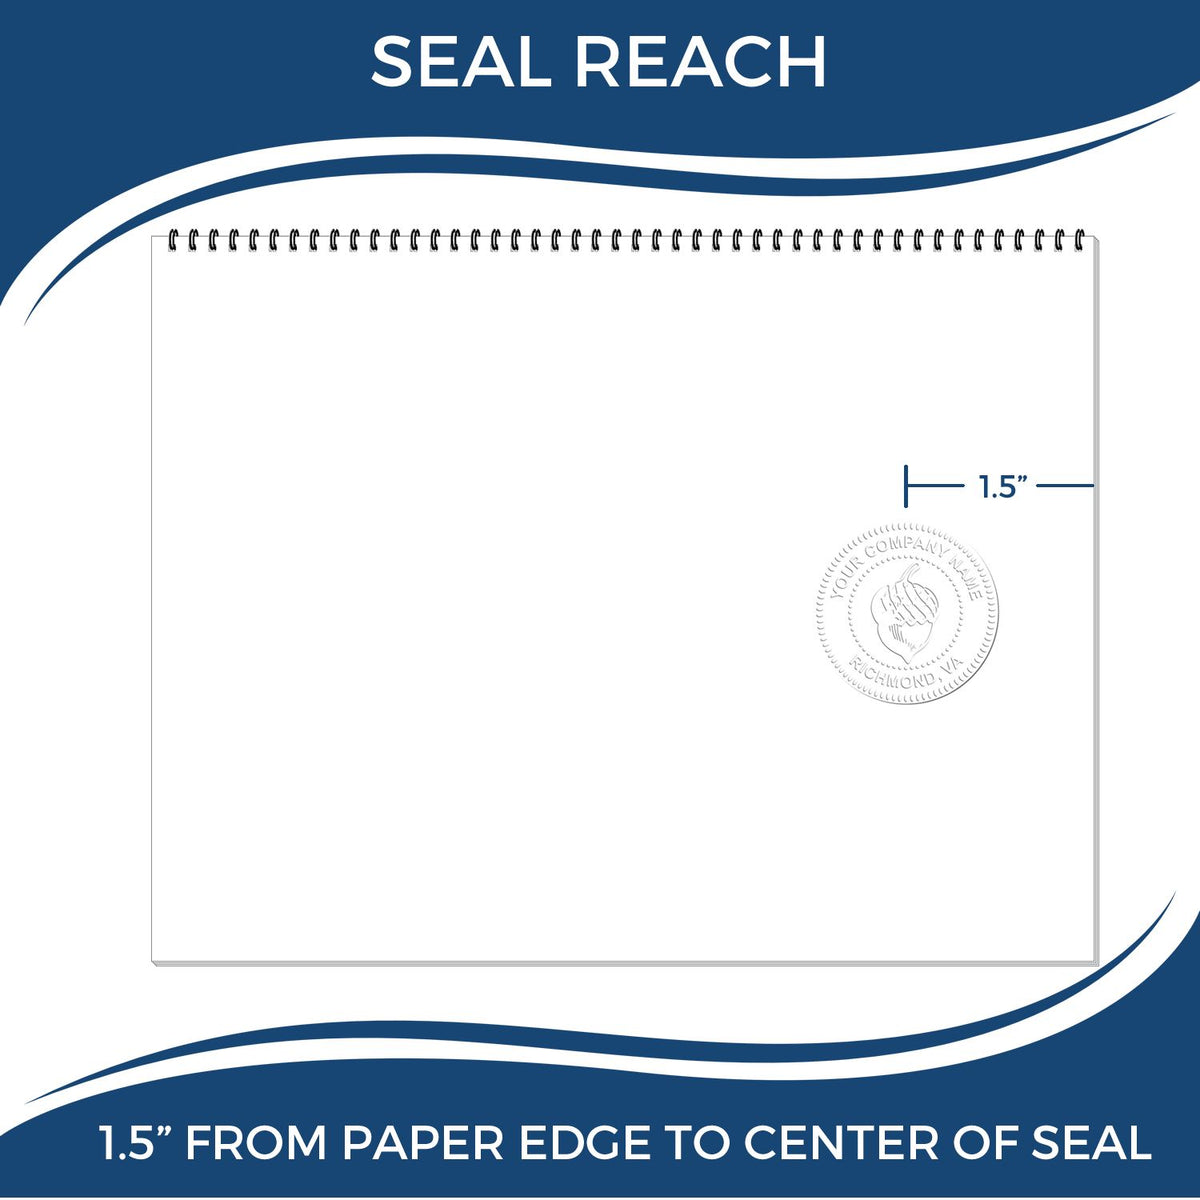 An infographic showing the seal reach which is represented by a ruler and a miniature seal image of the State of Ohio Soft Land Surveyor Embossing Seal